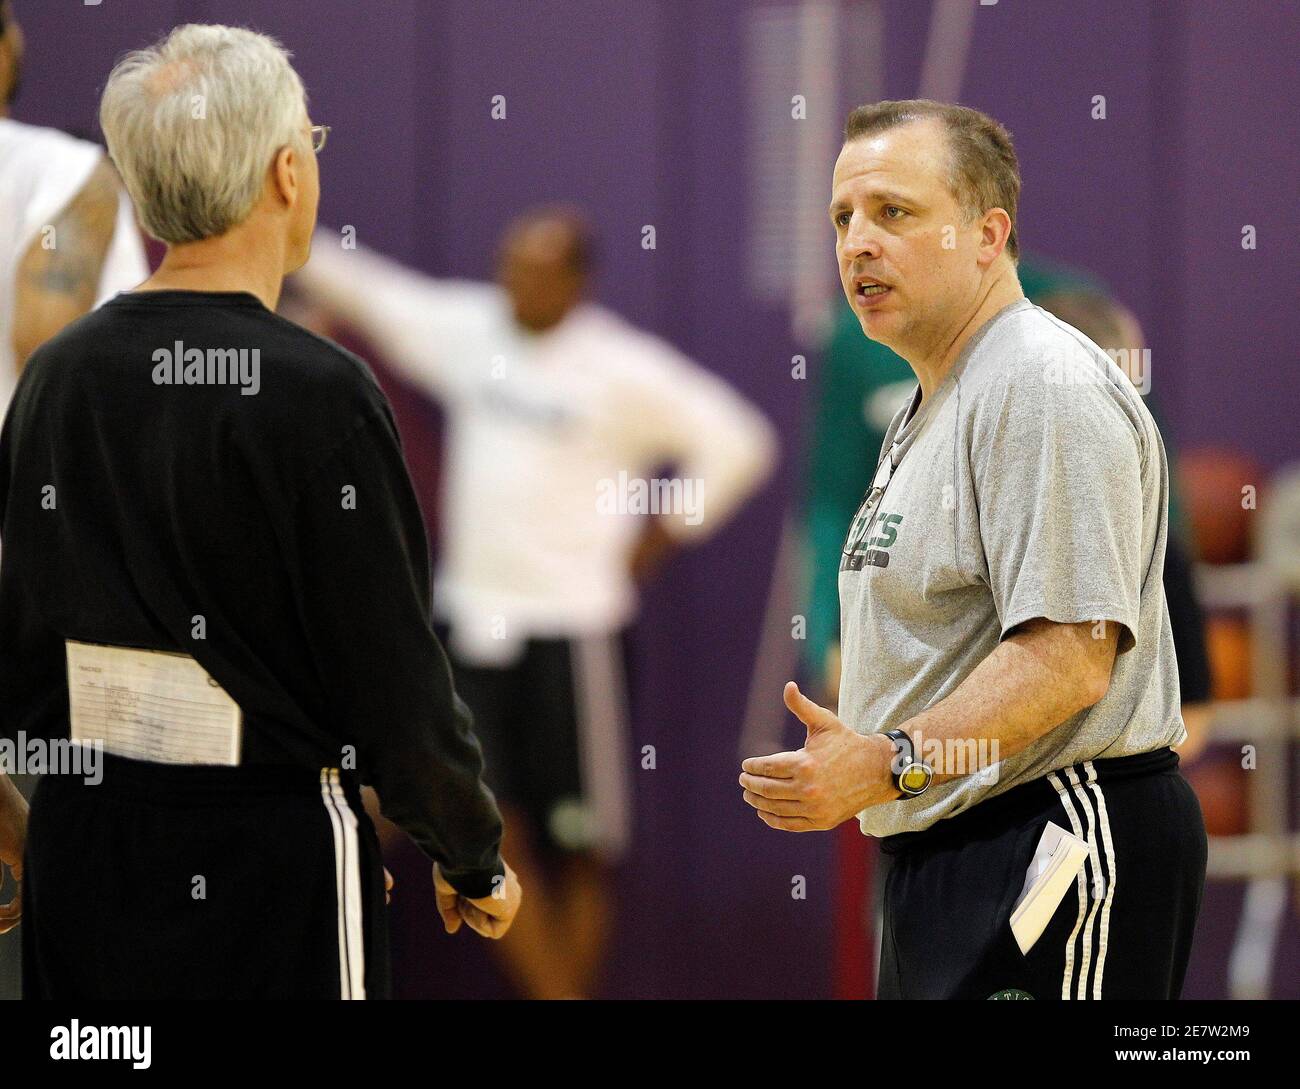 Boston Celtics assistant coach Tom Thibodeau (R) talks with assistant coach Kevin  Eastman during practice to prepare for Game 2 against the Los Angeles  Lakers in the 2010 NBA Finals basketball series